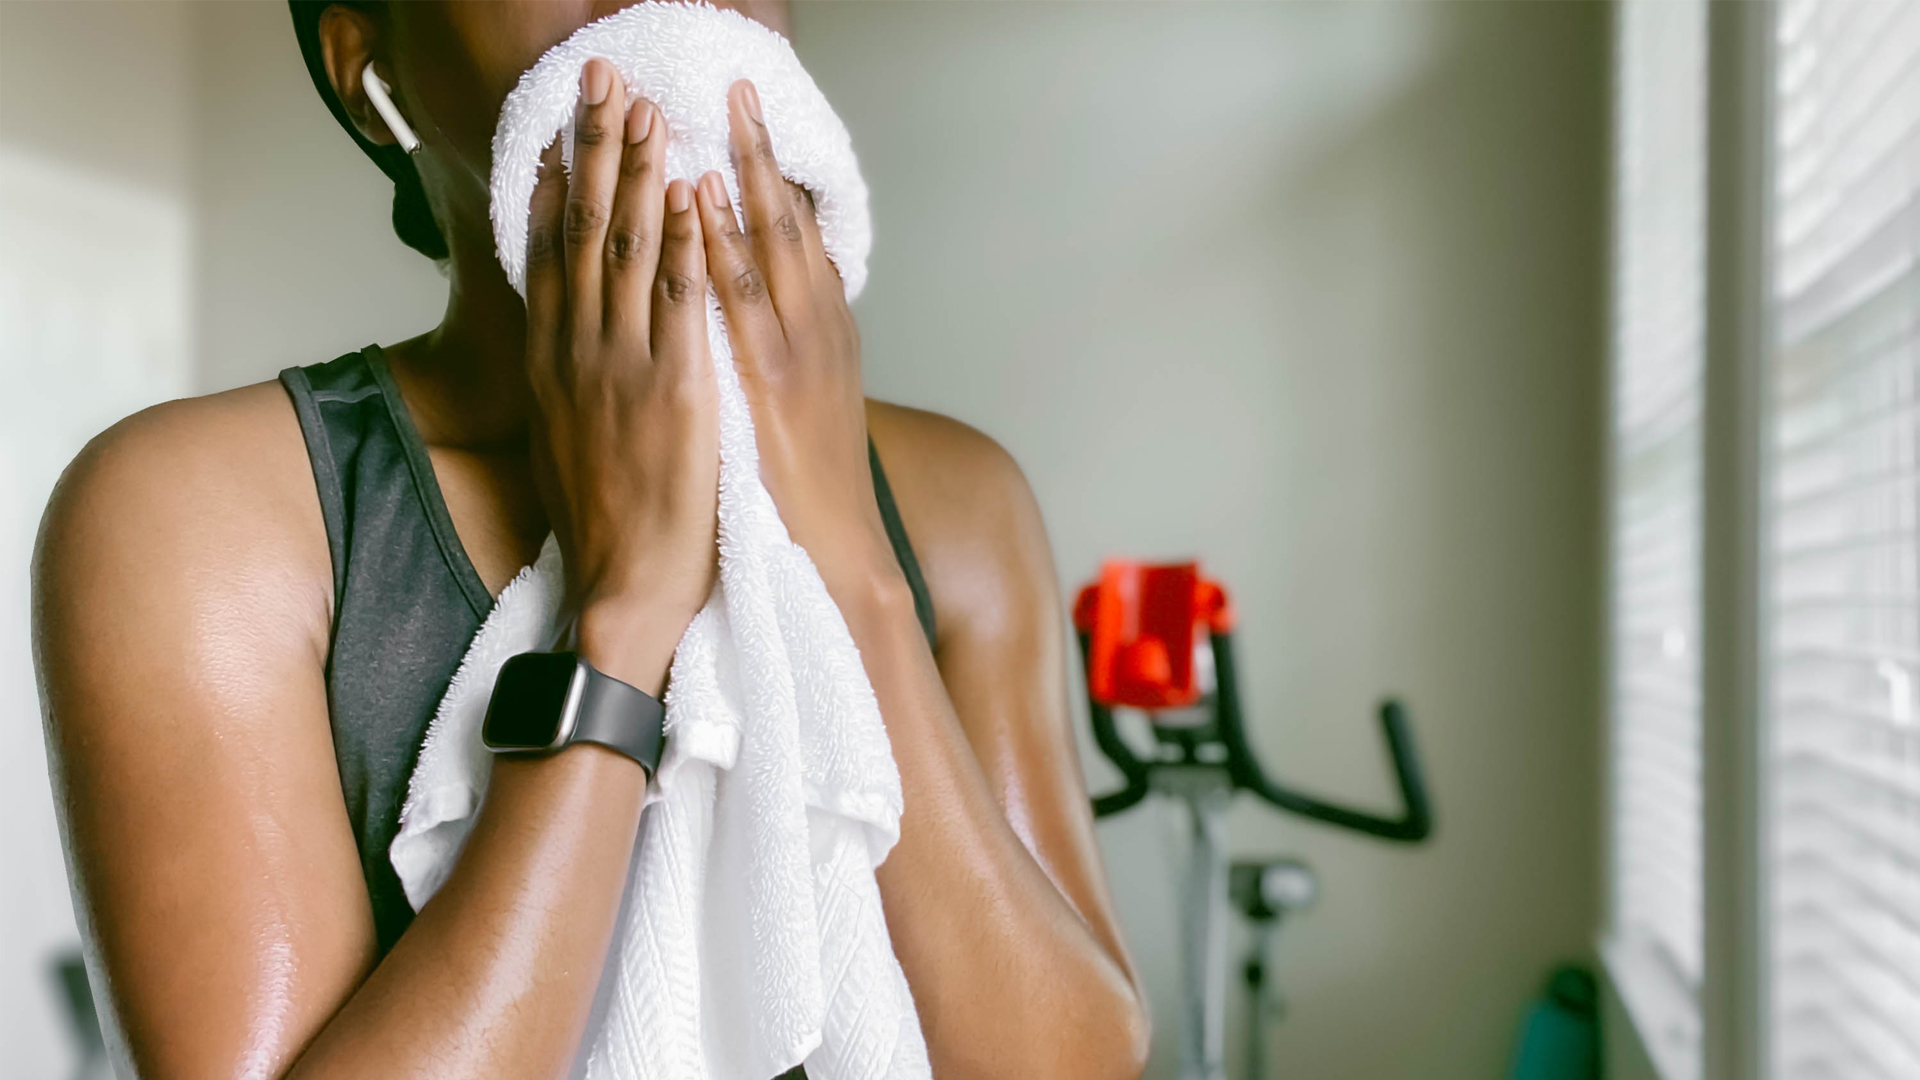 The image of a woman after a workout on a bicycle